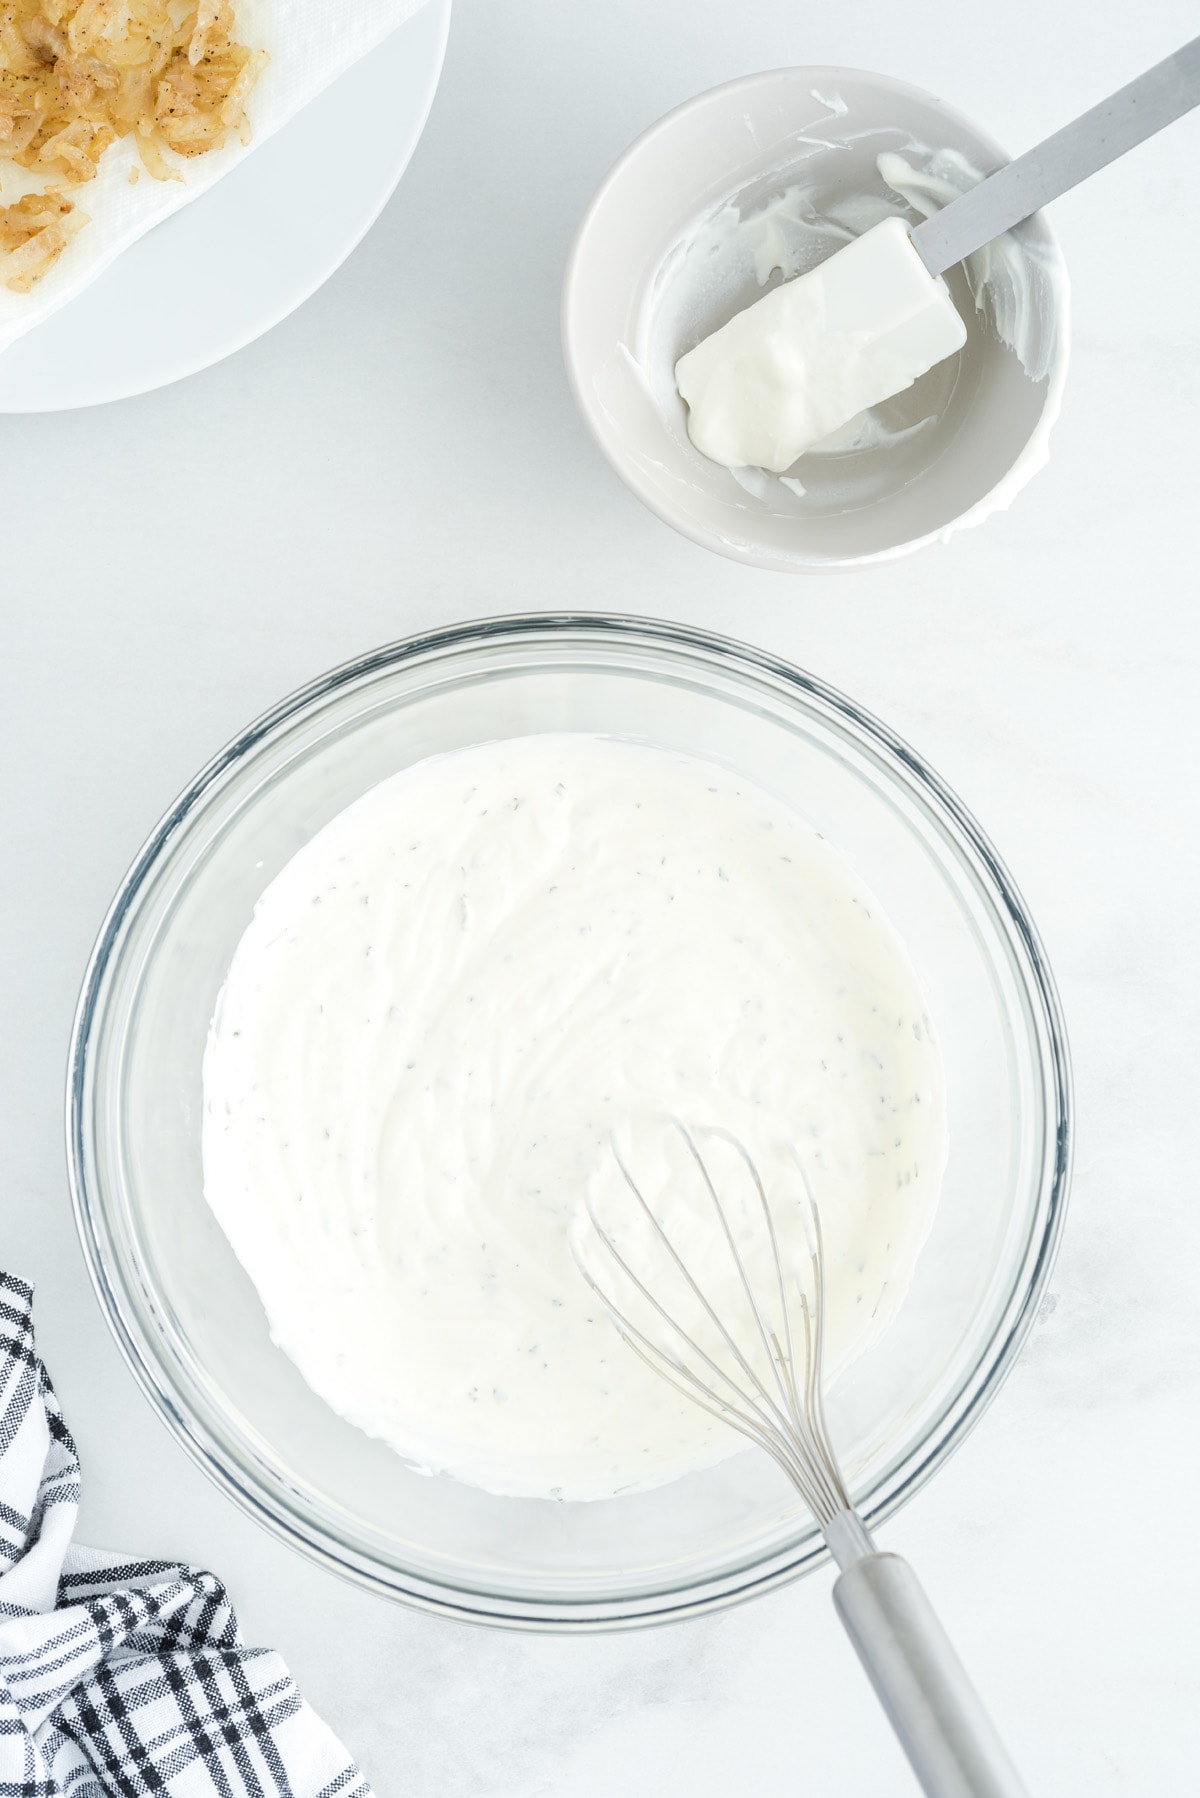 Whisk together sour cream, mayo, dried parsley, and onion powder